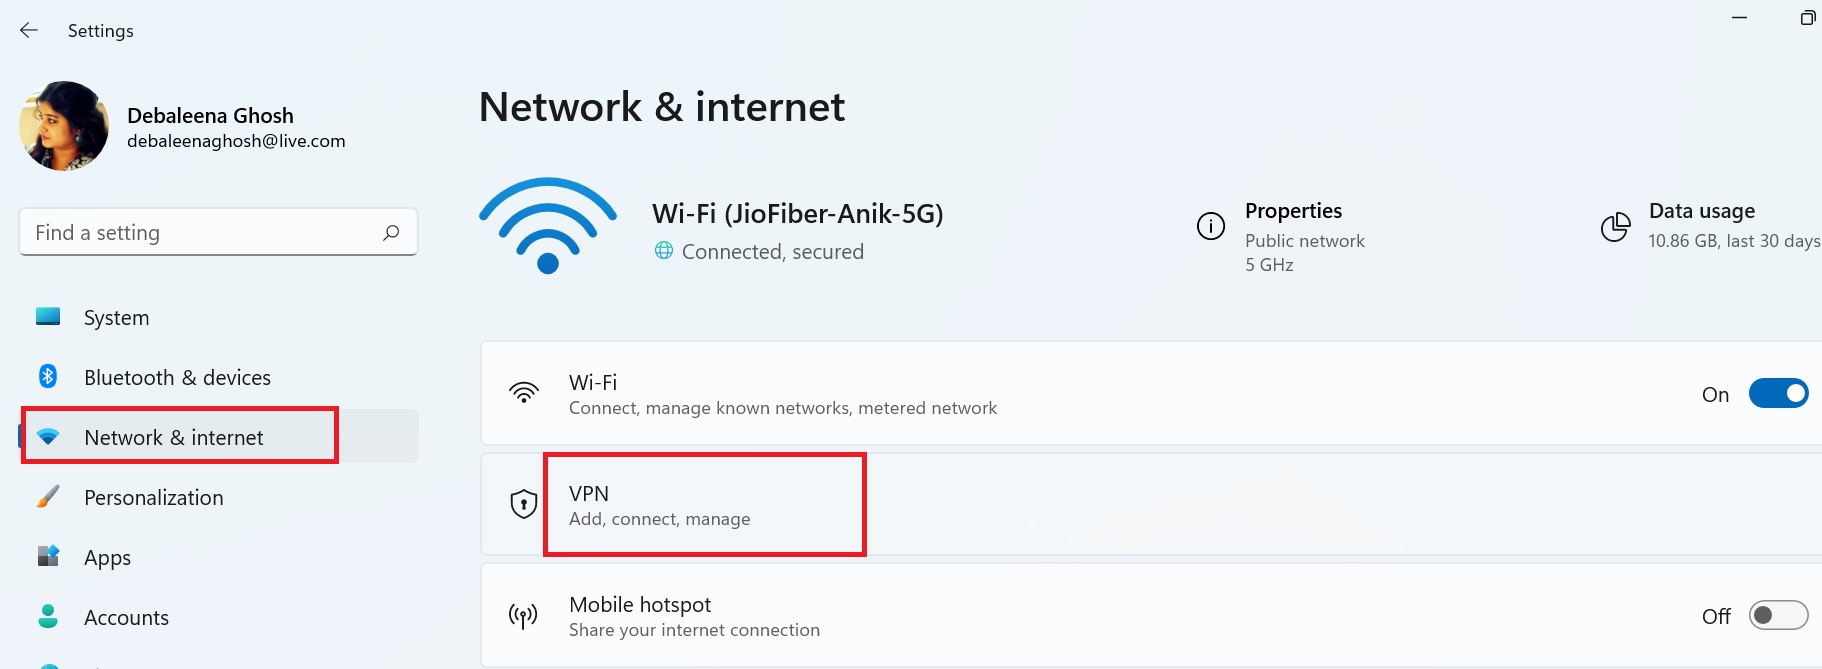 How To Turn On/Off VPN For Roaming And Metered Connection In Windows 11